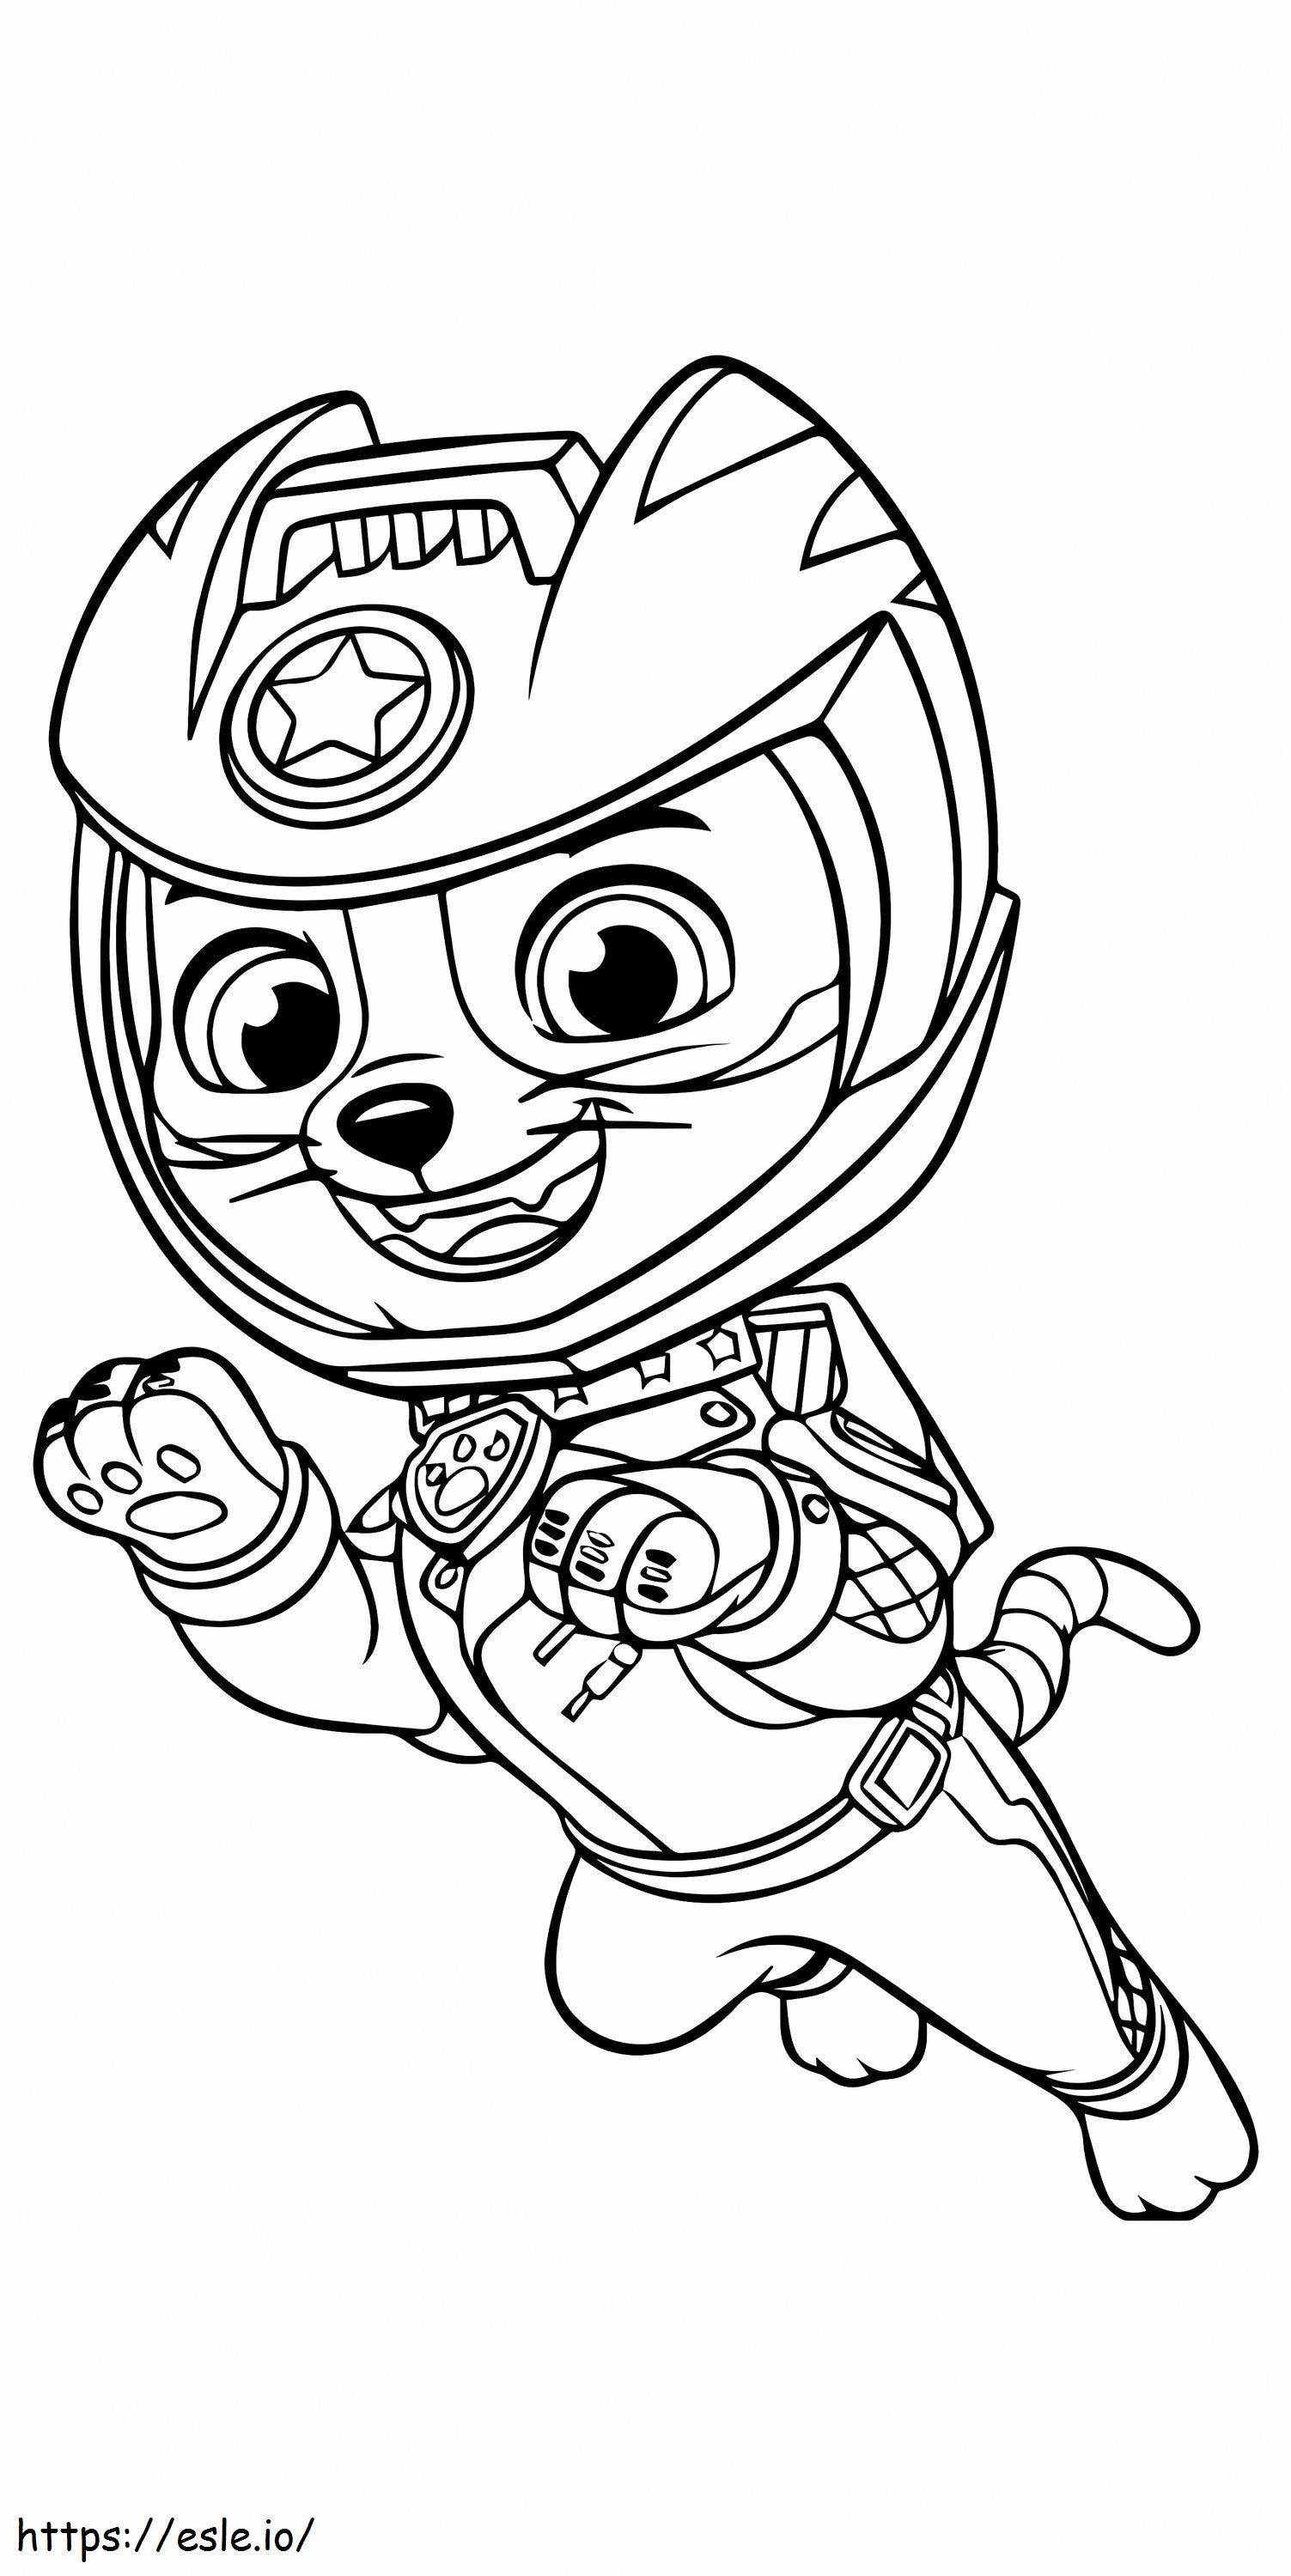 Wild Cat From Paw Patrol Moto Pups 2 coloring page